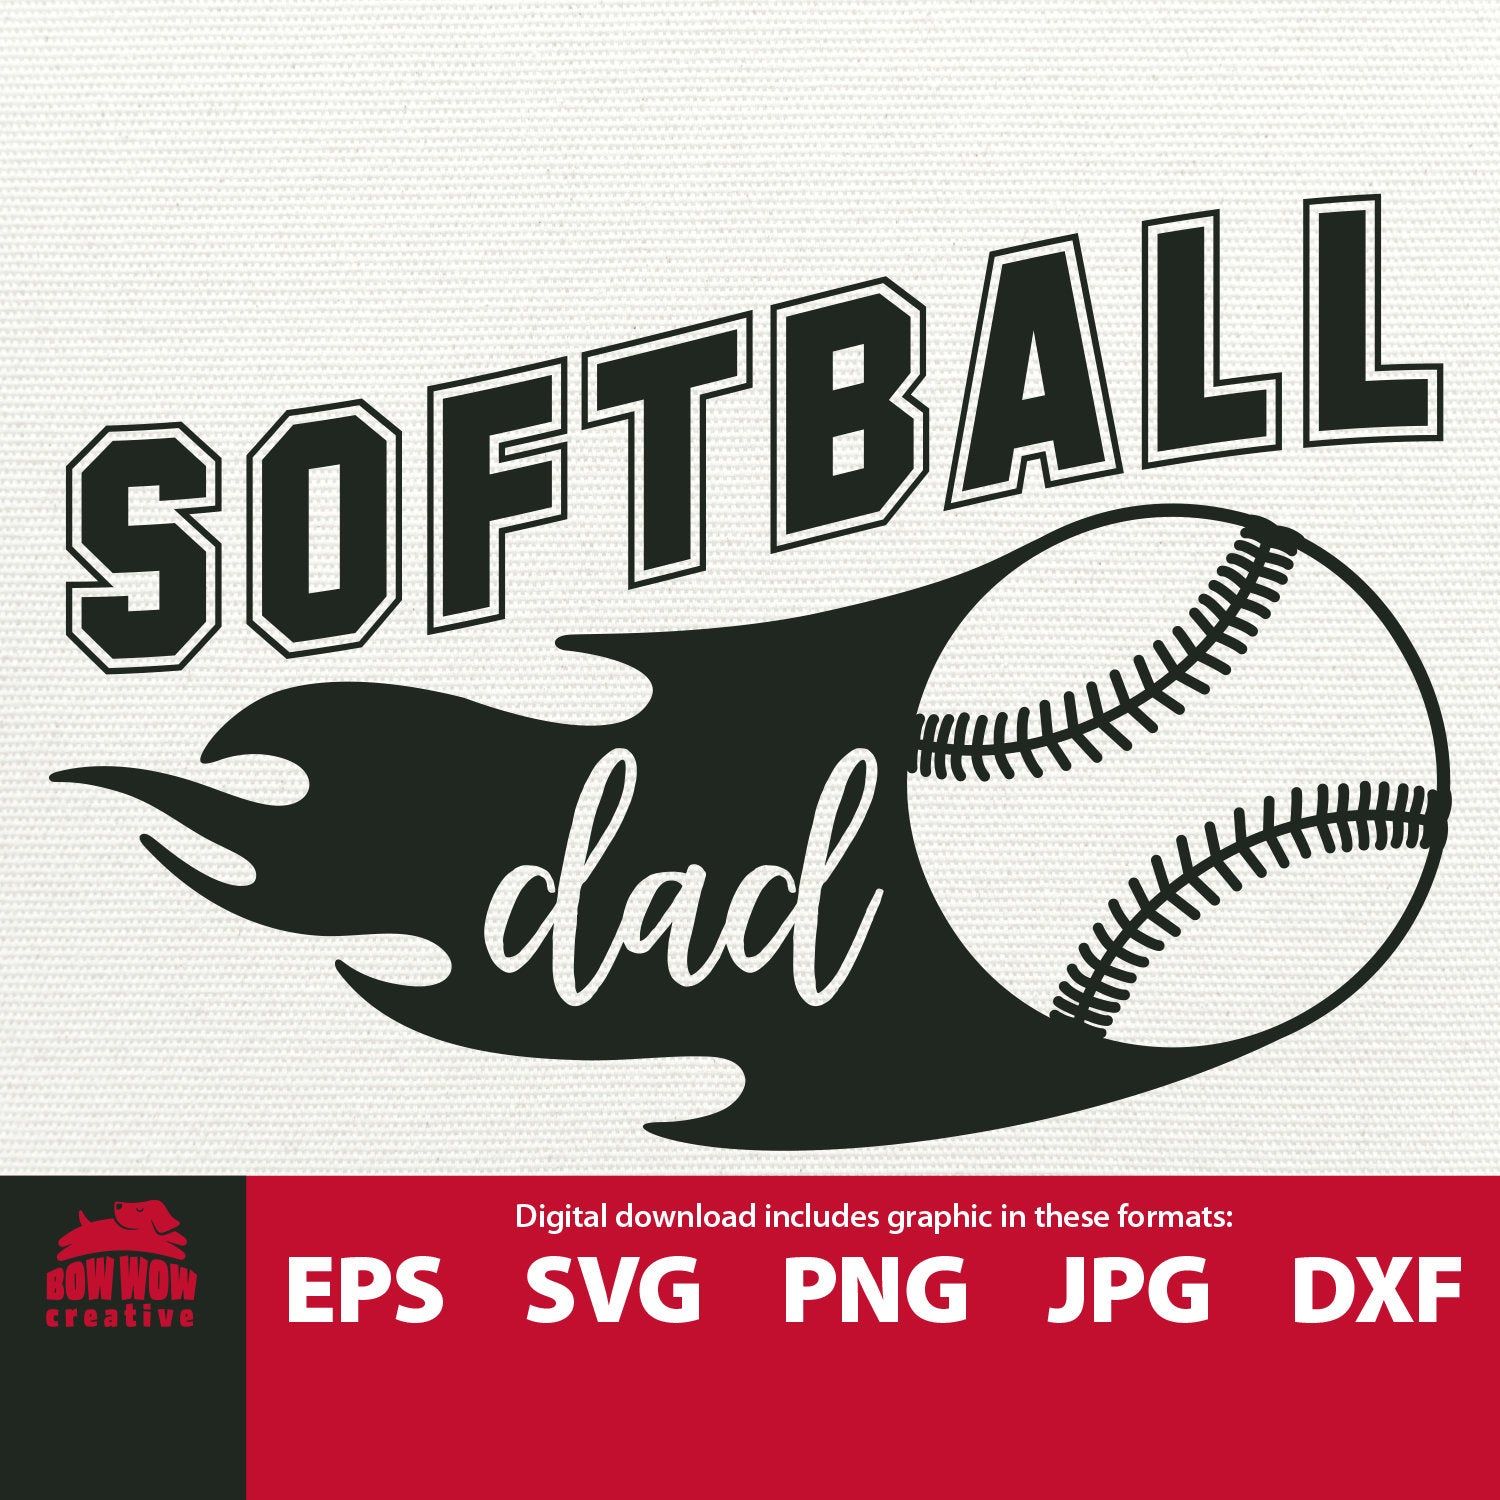 Download Softball clipart dad, Softball dad Transparent FREE for download on WebStockReview 2021